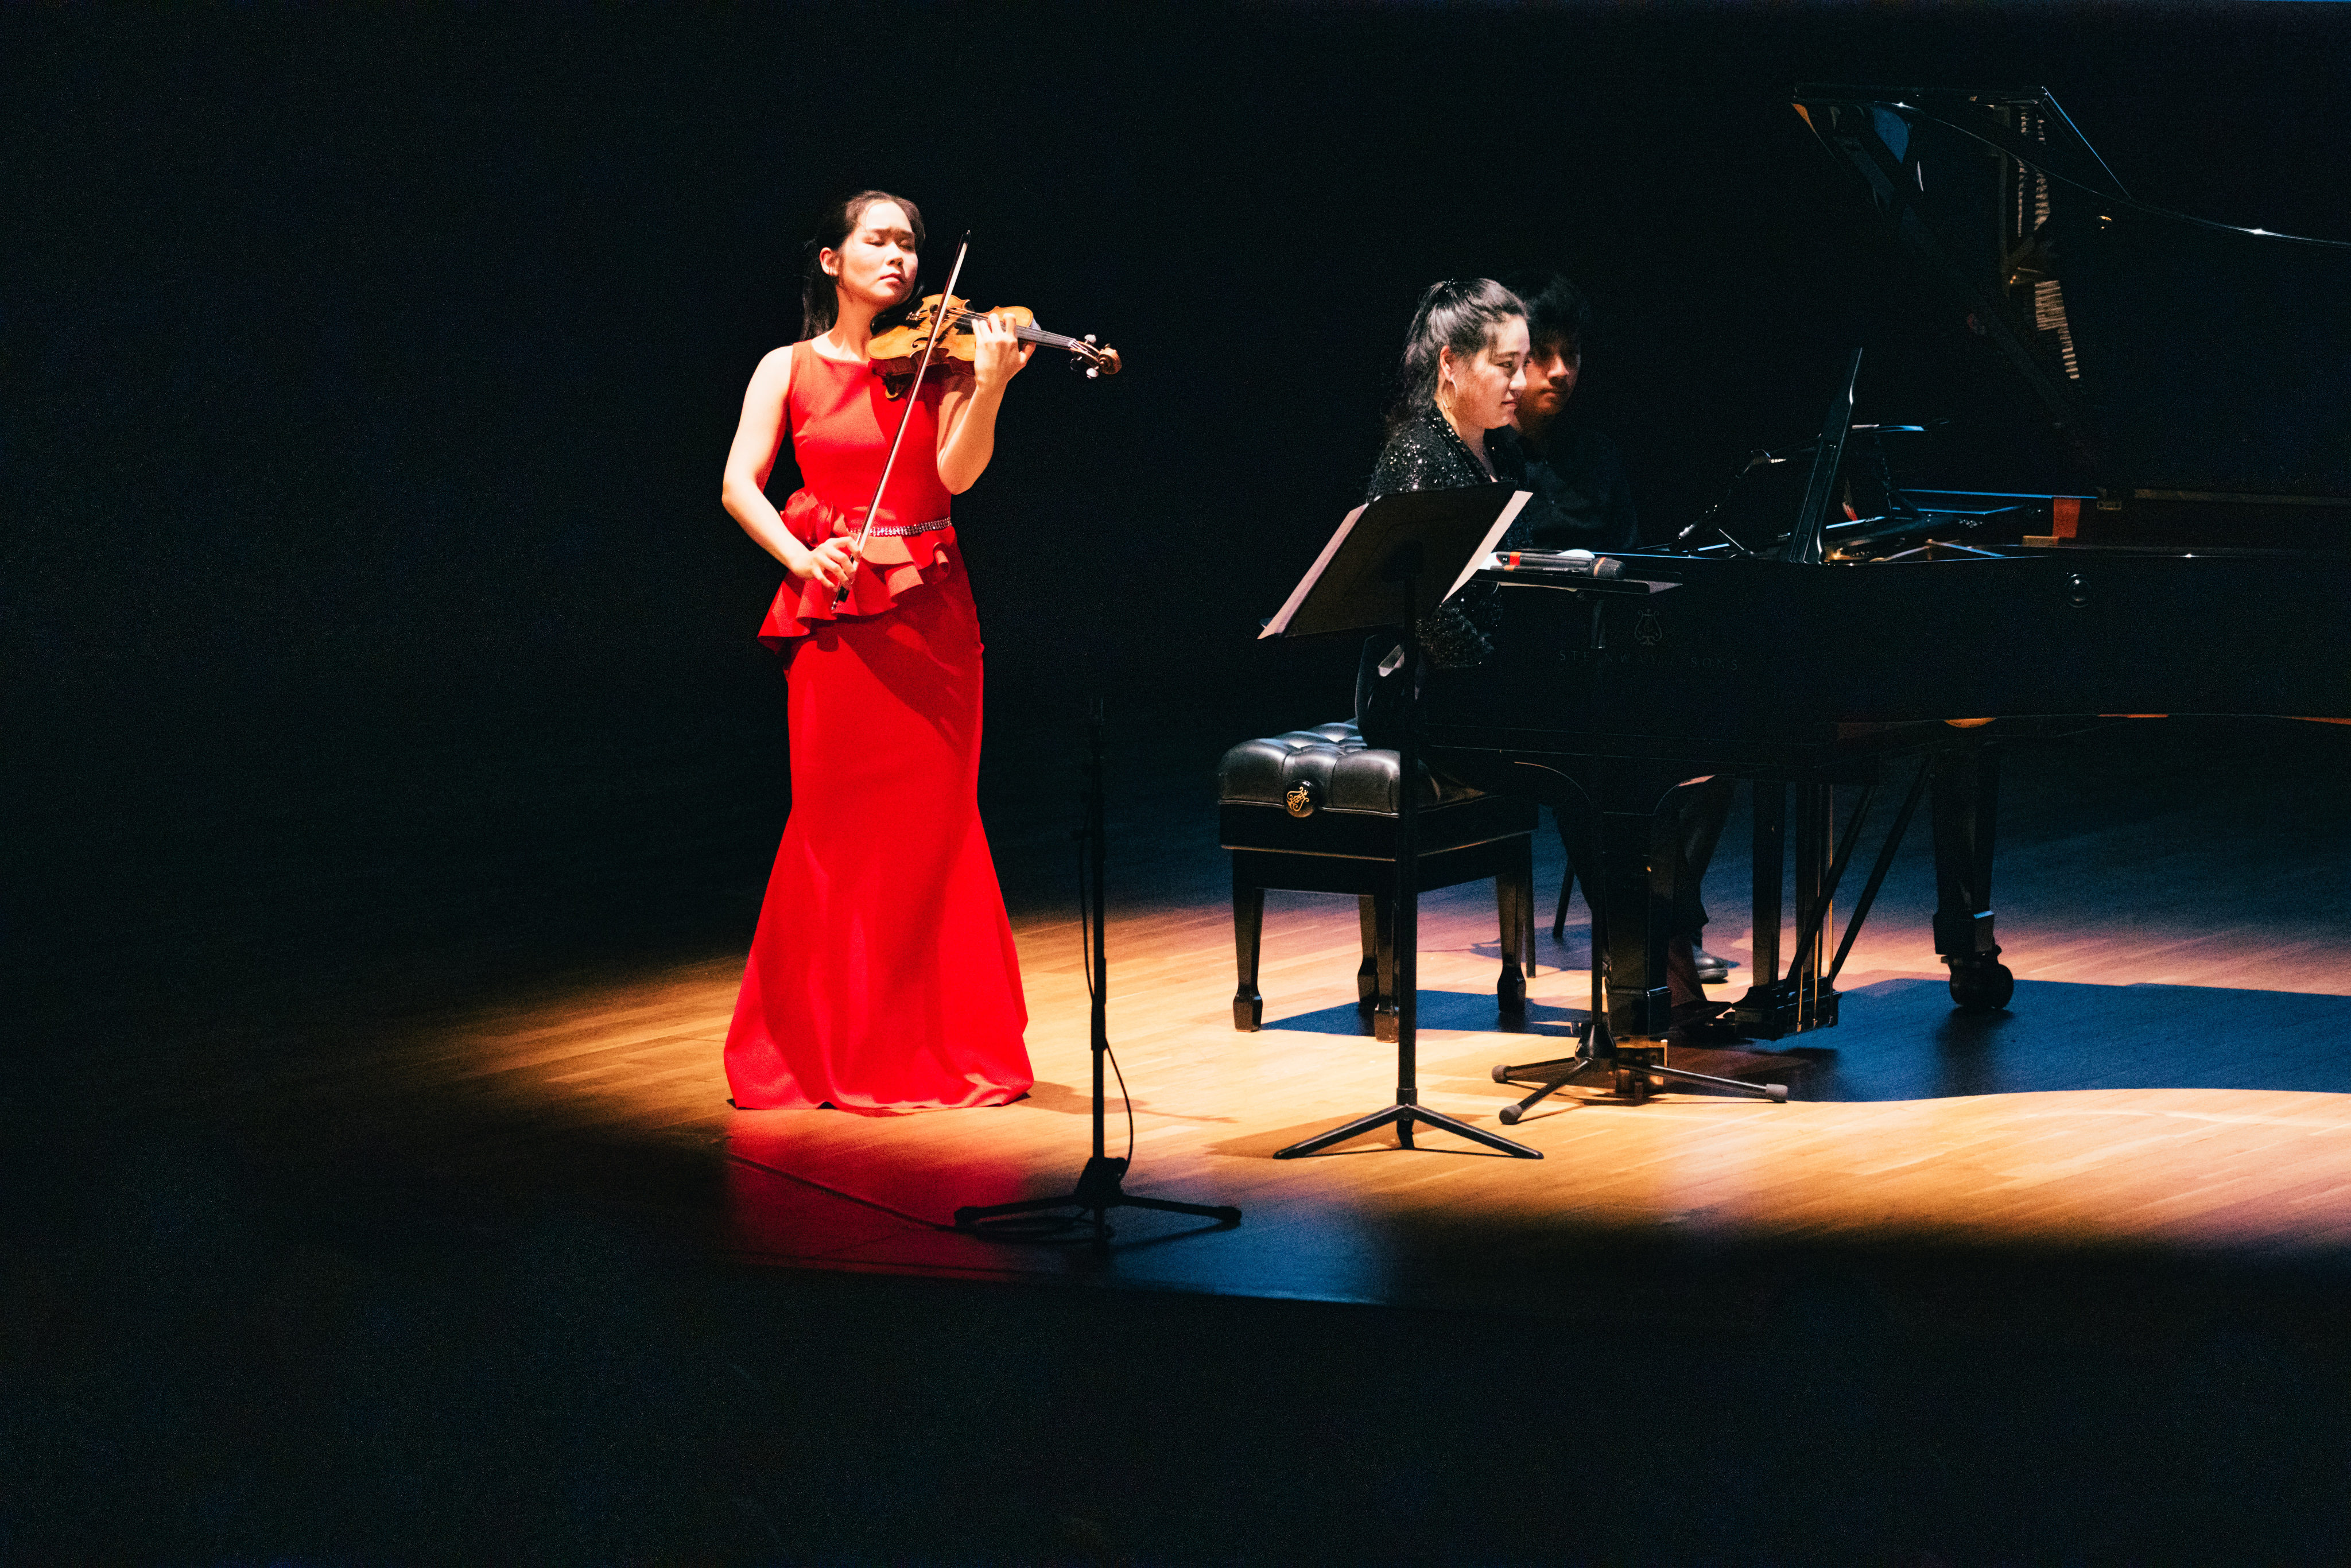 Violinist Esther Yoo and pianist Zee Zee perform during their June 5, 2023 recital at Hong Kong City Hall organised by Premiere Performances. Both musicians dazzled with their playing of works by Debussy, Grieg, Rachmaninov, Vieuxtemps and Jeongkyu Park. Photo: Kenny Cheung/Premiere Performances of Hong Kong